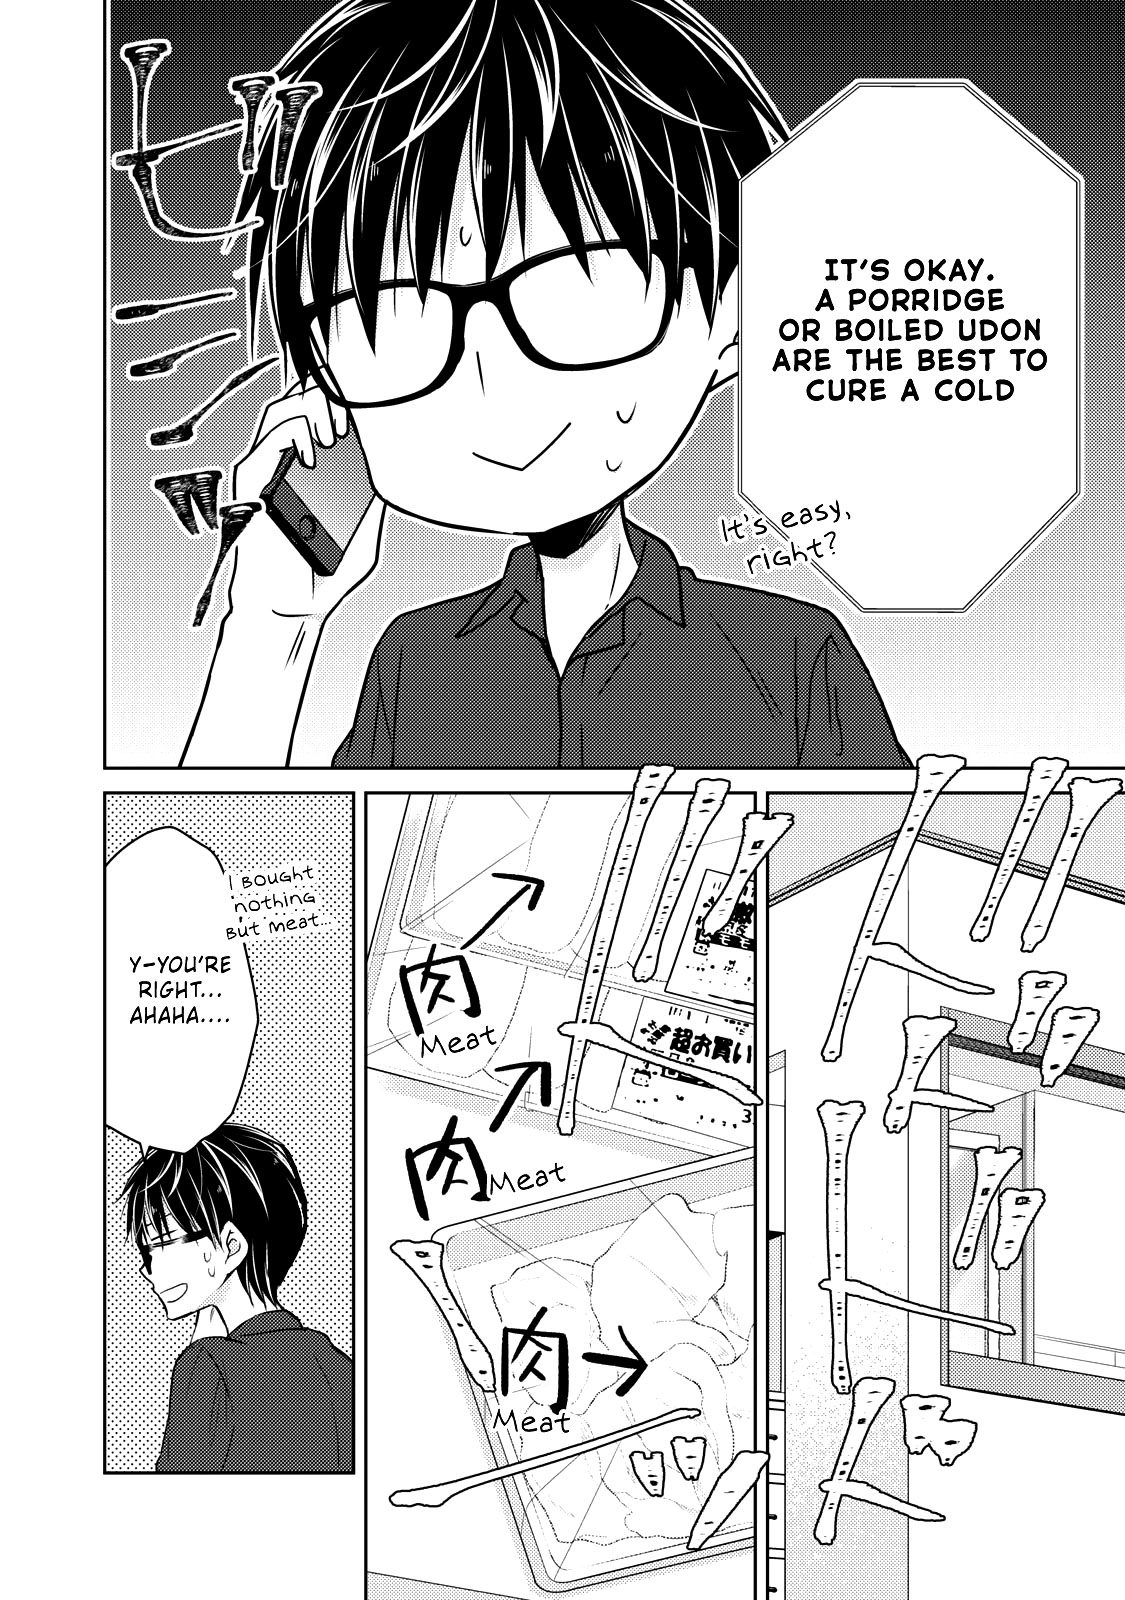 We May Be an Inexperienced Couple but... Vol. 5 Ch. 40 Nursing